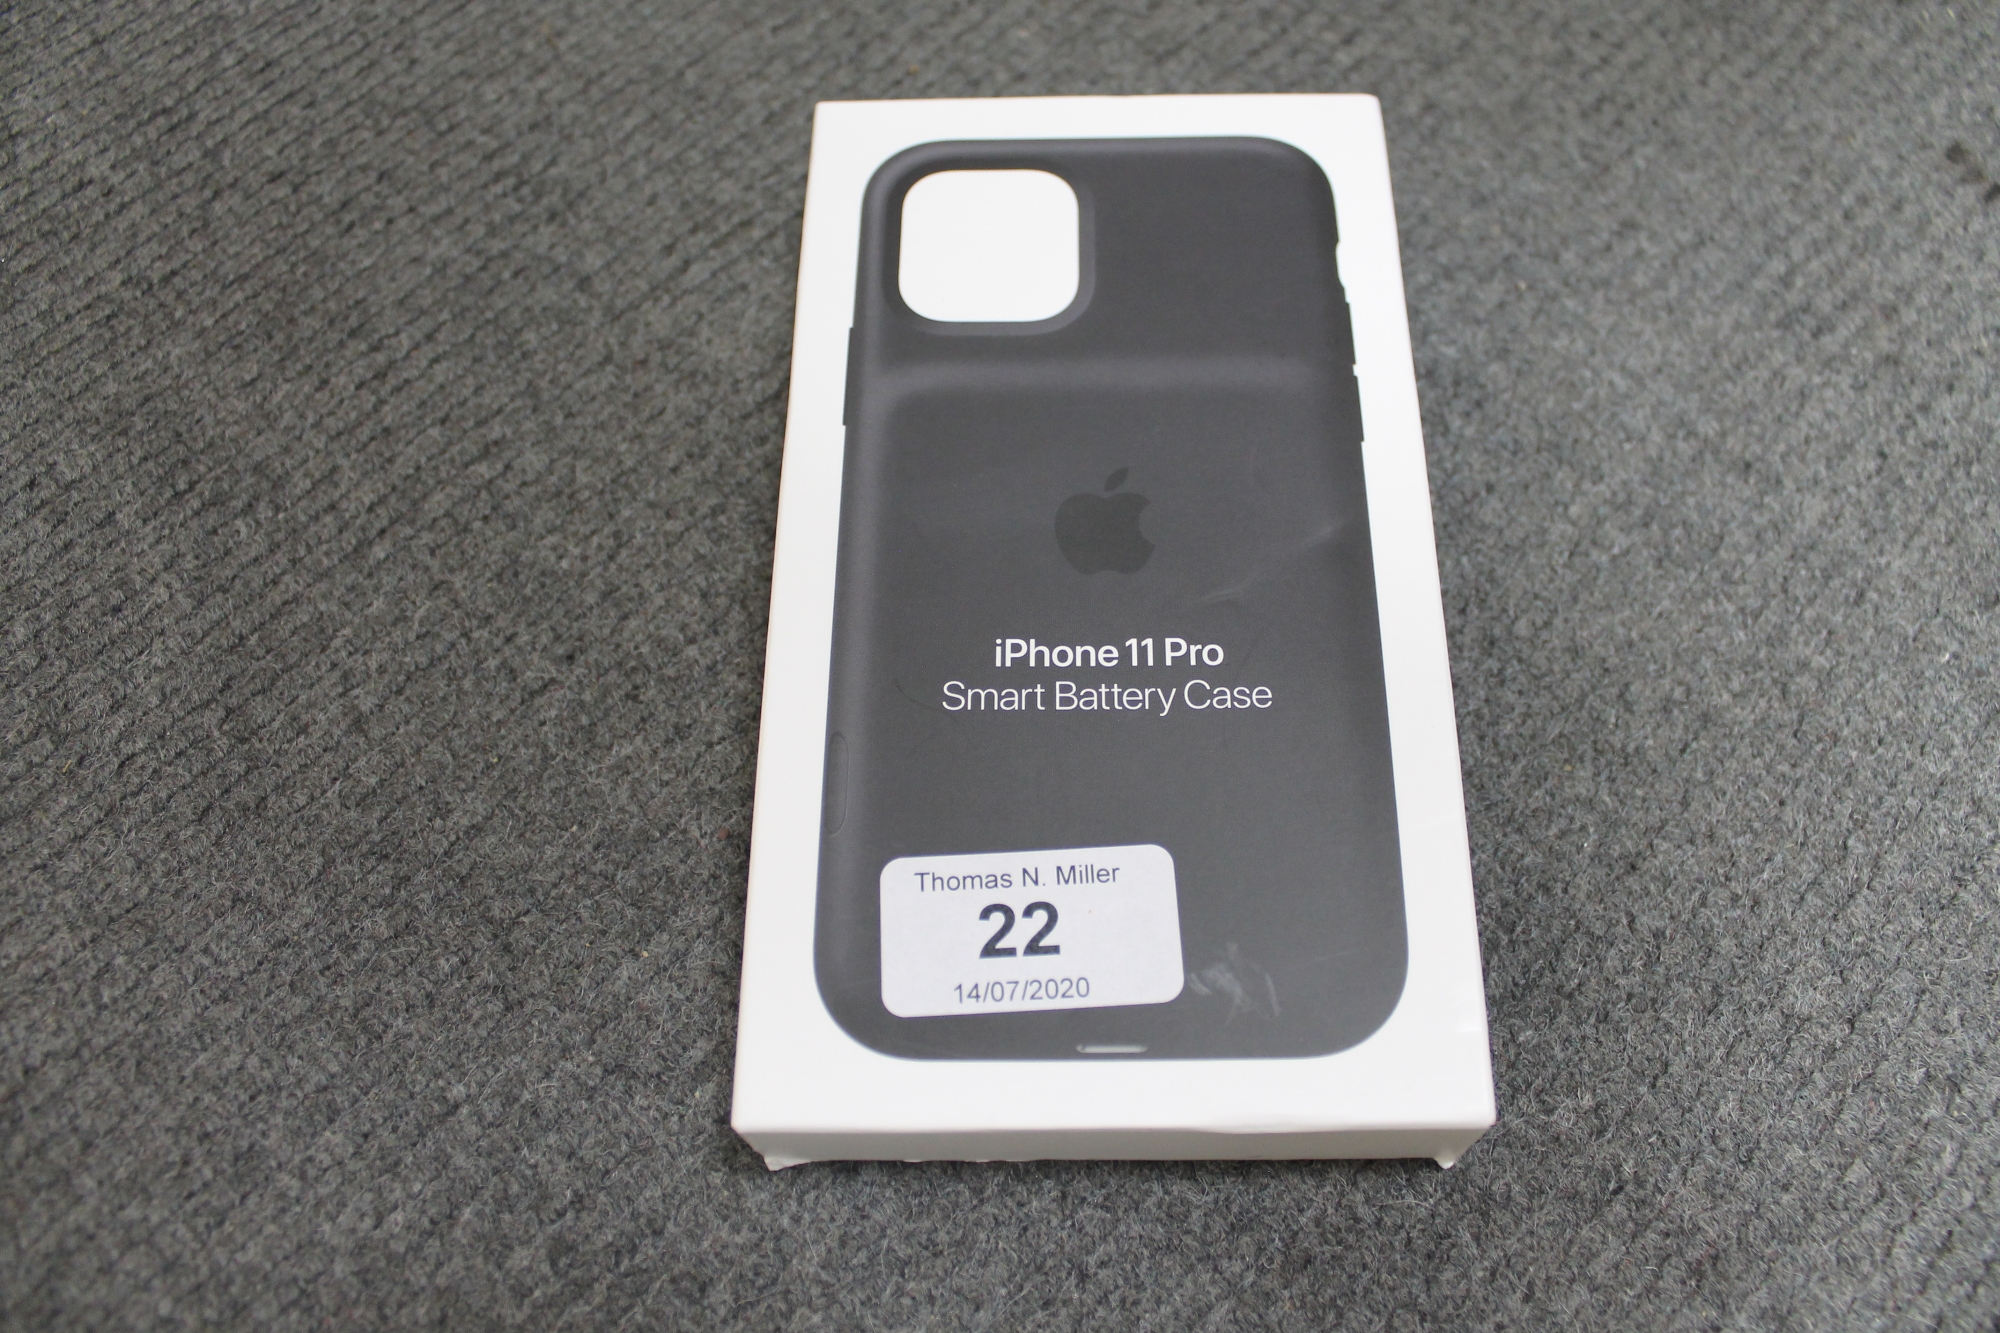 Apple : iPhone 11 Pro Smart Battery Case, model A2184, black, brand new & boxed. (R.R.P. £129.